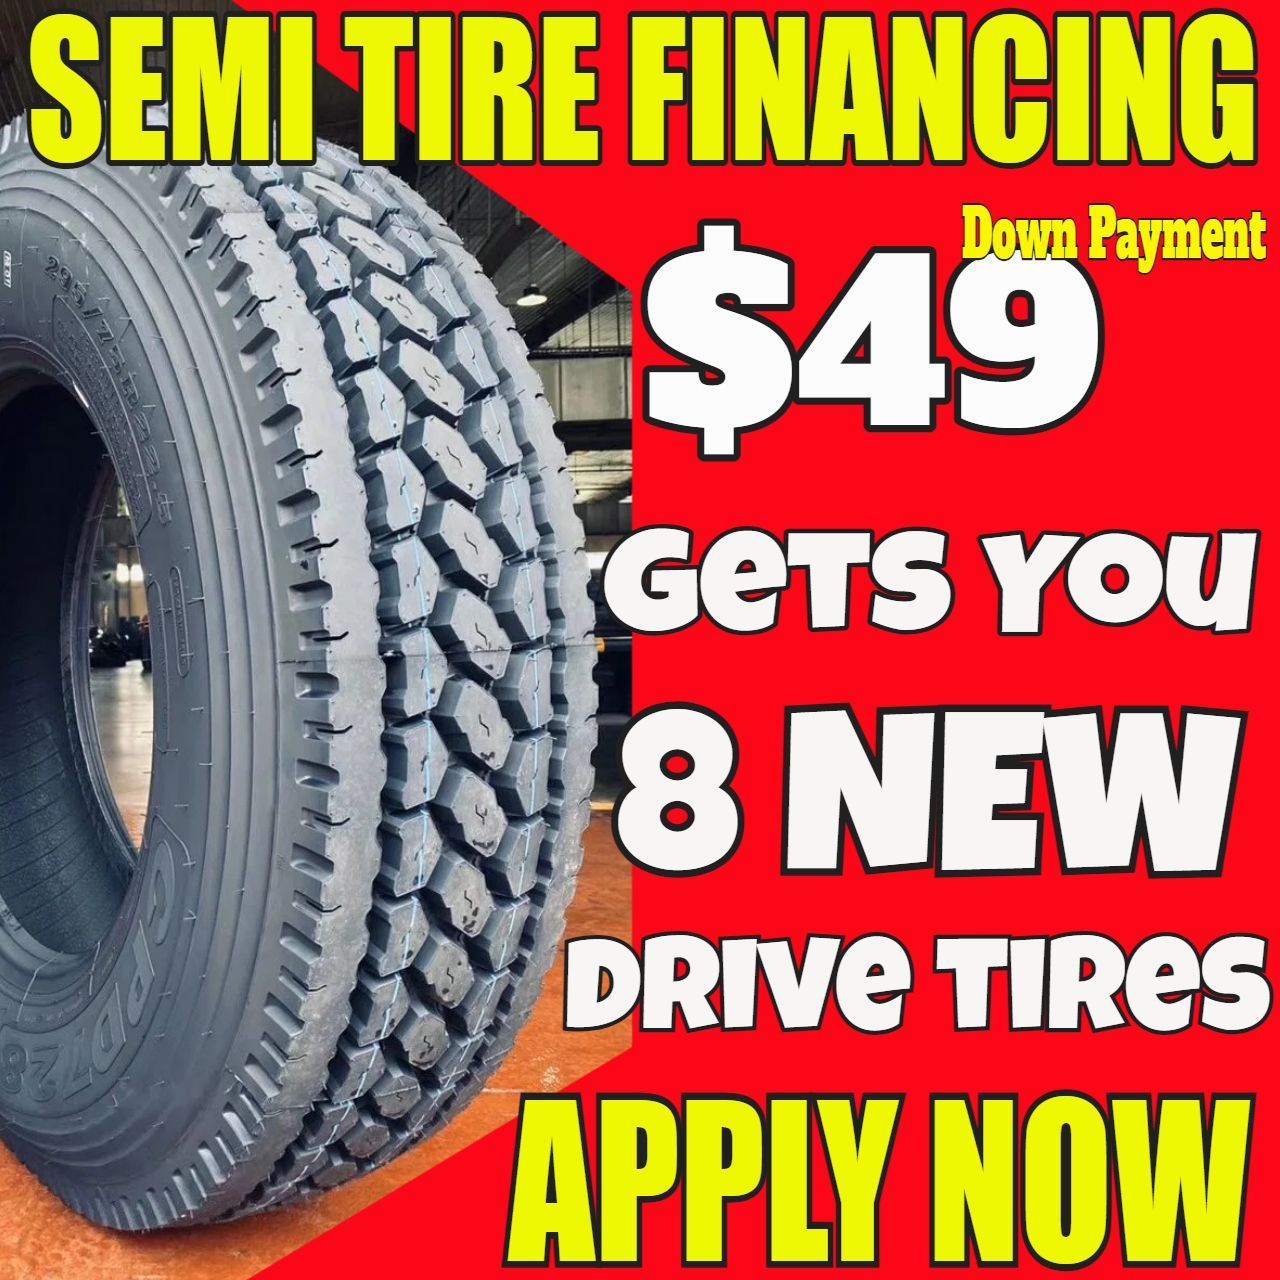 Commercial semi-truck tires Fort Lauderdale, FL. 18-wheeler Heavy-duty Big-Rig trucking tires at cheap tractor-trailer auto prices. Pembroke Pines, FL - Miramar, FL - Gainesville, FL